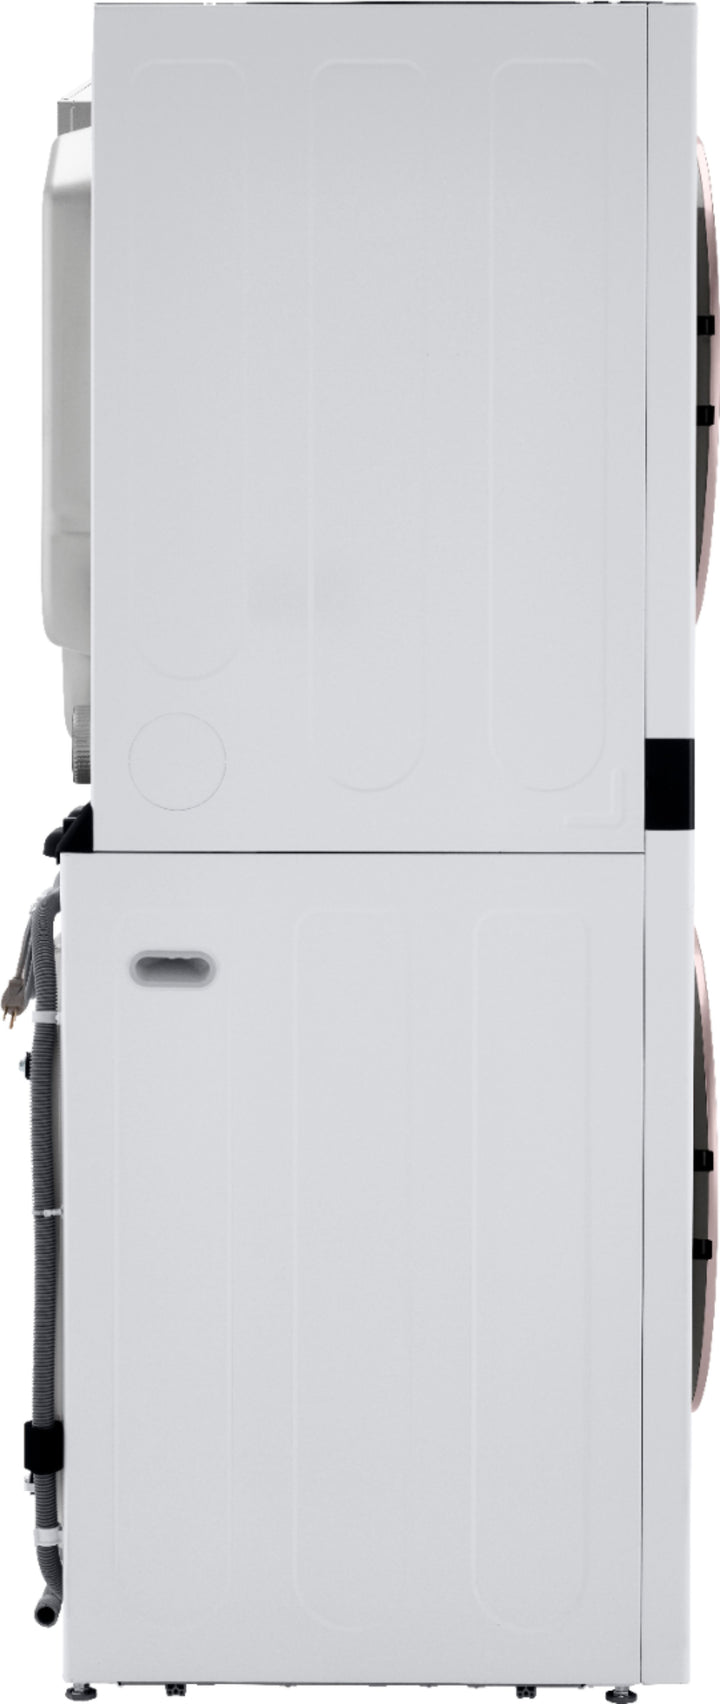 LG - 4.5 Cu. Ft. HE Smart Front Load Washer and 7.4 Cu. Ft. Electric Dryer WashTower with Built-In Intelligence - White_9